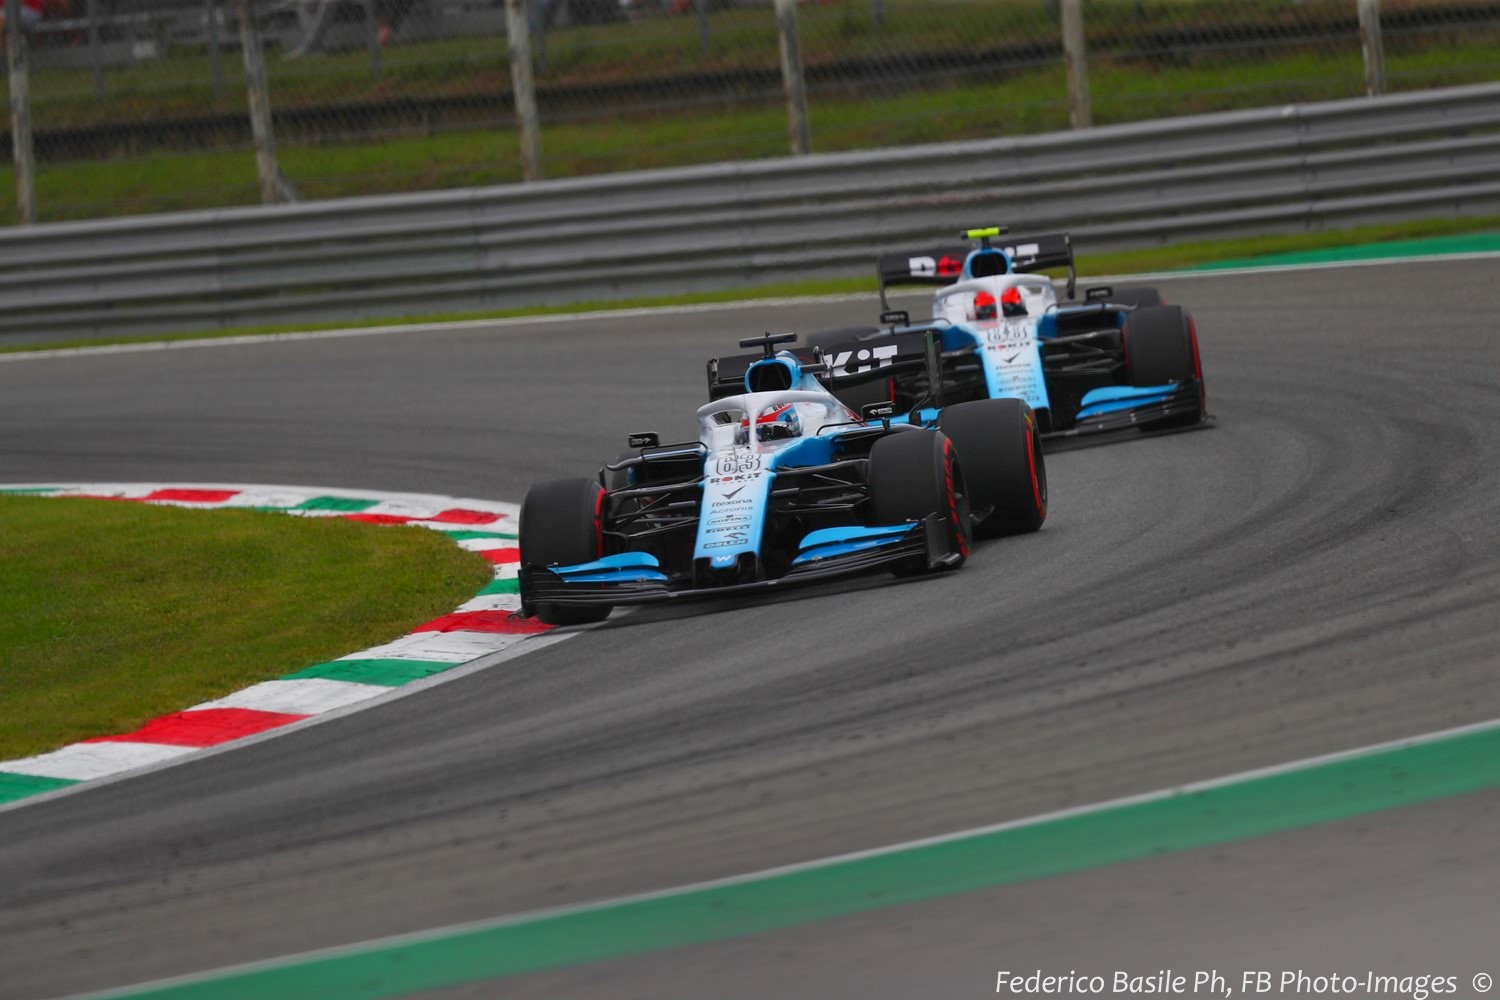 Unfortunately with Williams cars will likely still run dead last